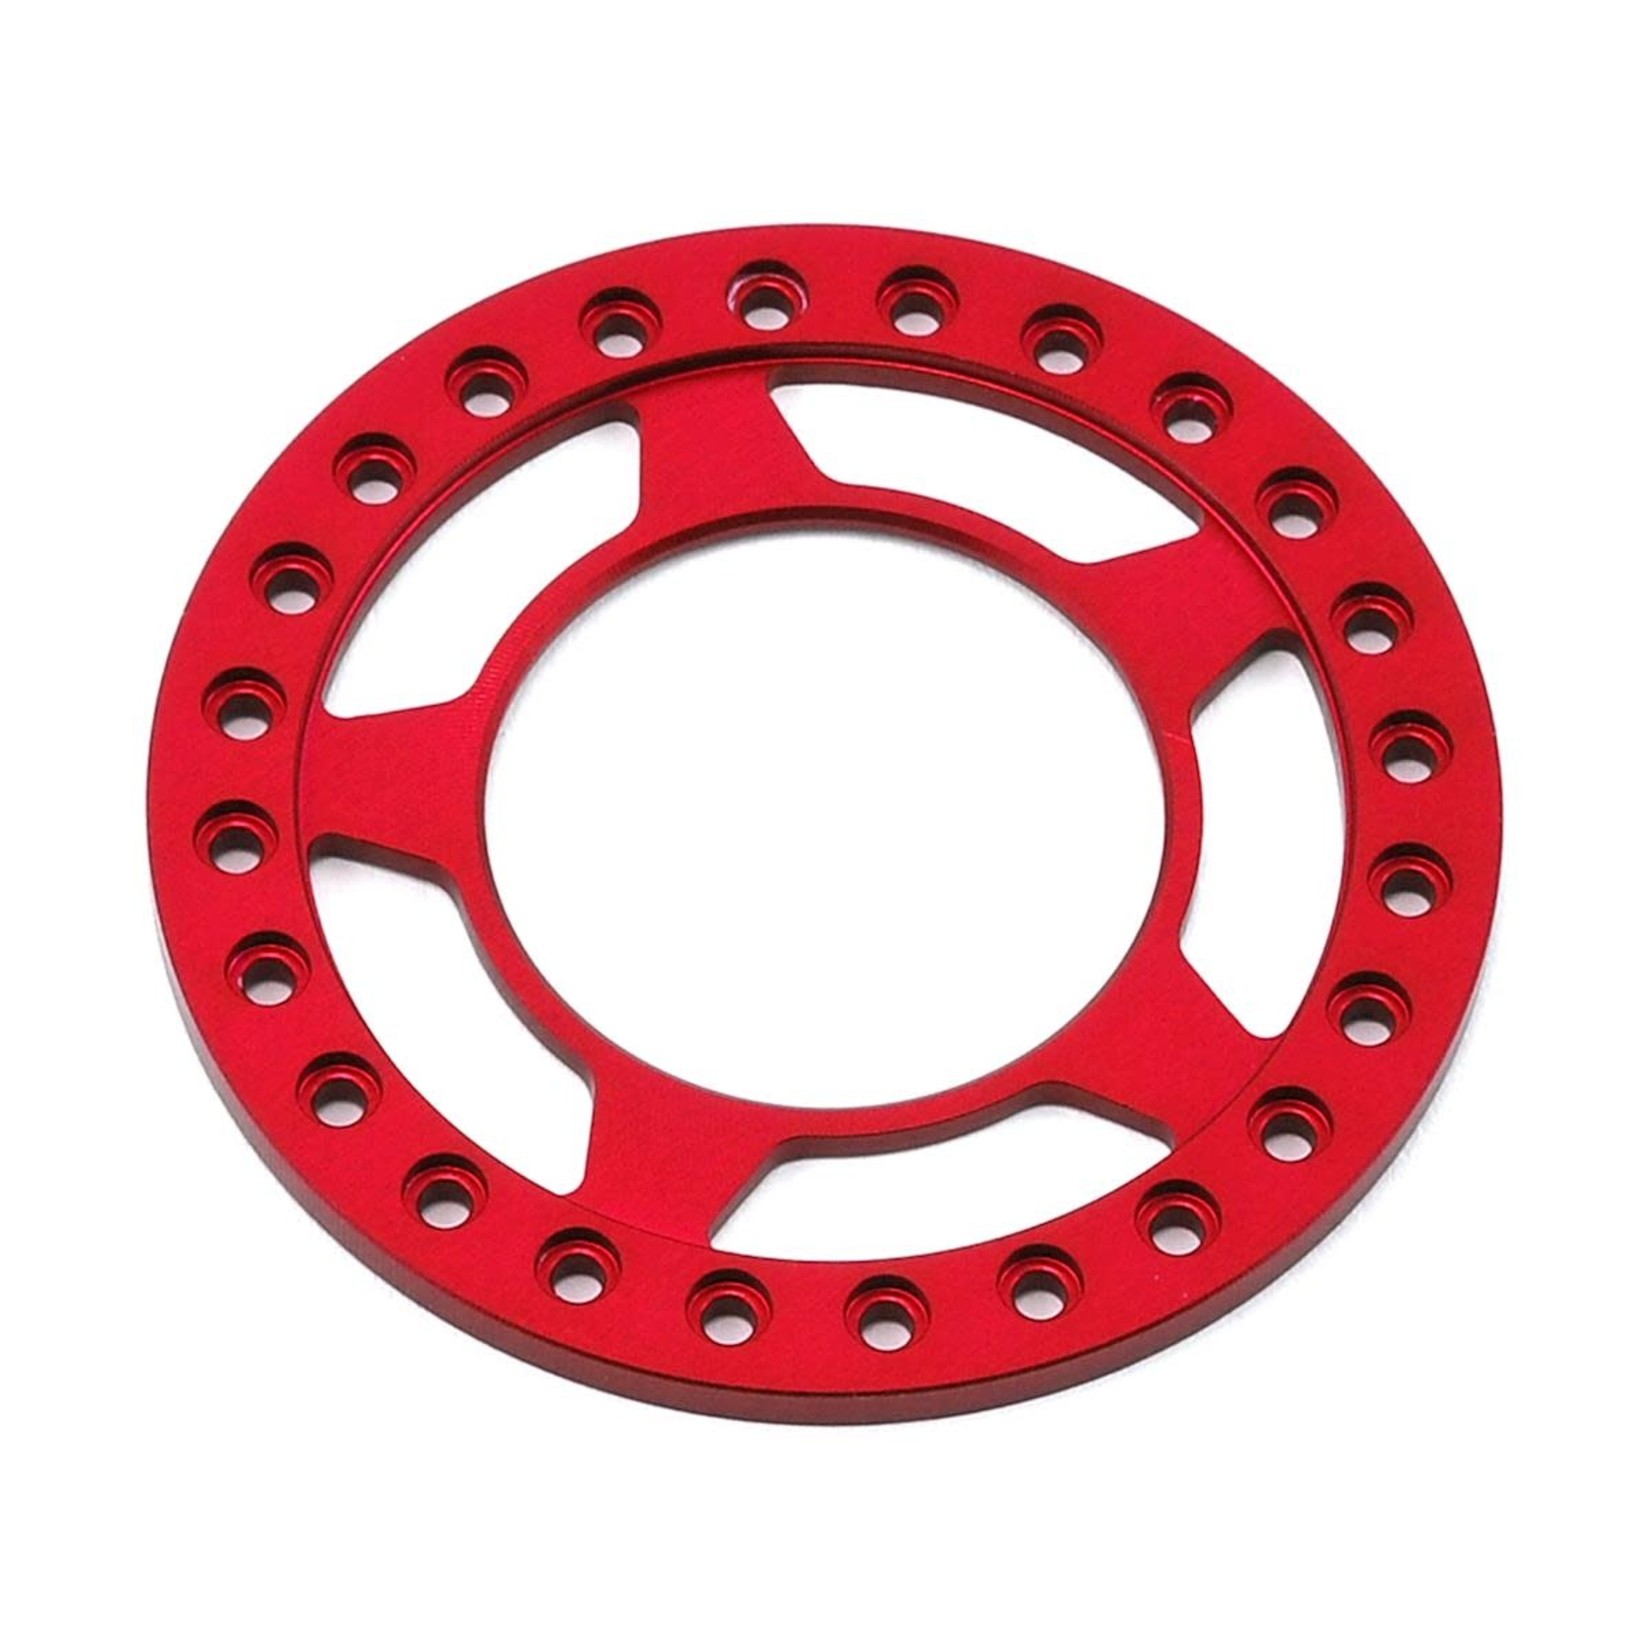 Vanquish Products Vanquish Products Spyder 1.9" Beadlock Ring (Red) #VPS05145